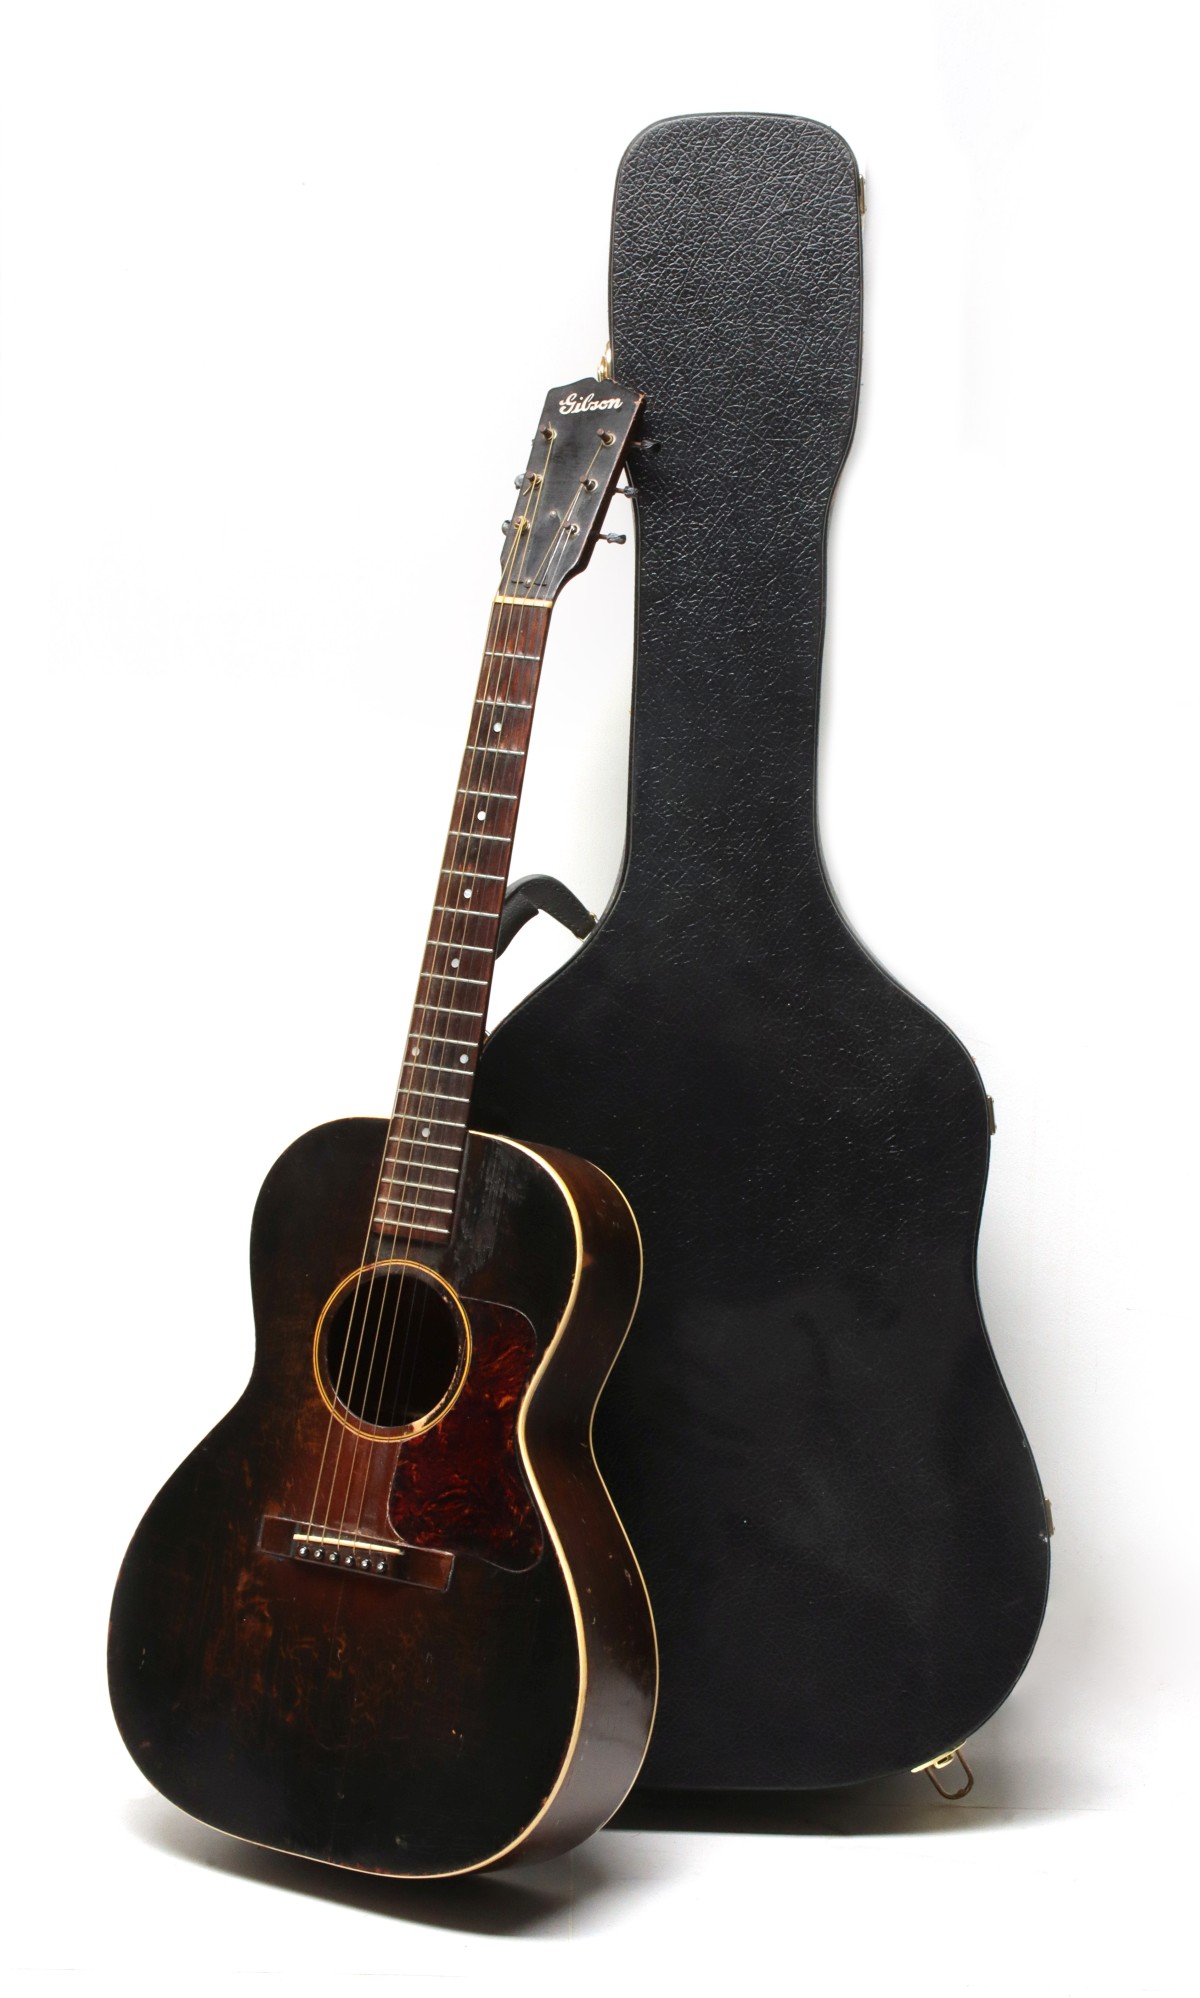 A GIBSON ACOUSTIC GUITAR